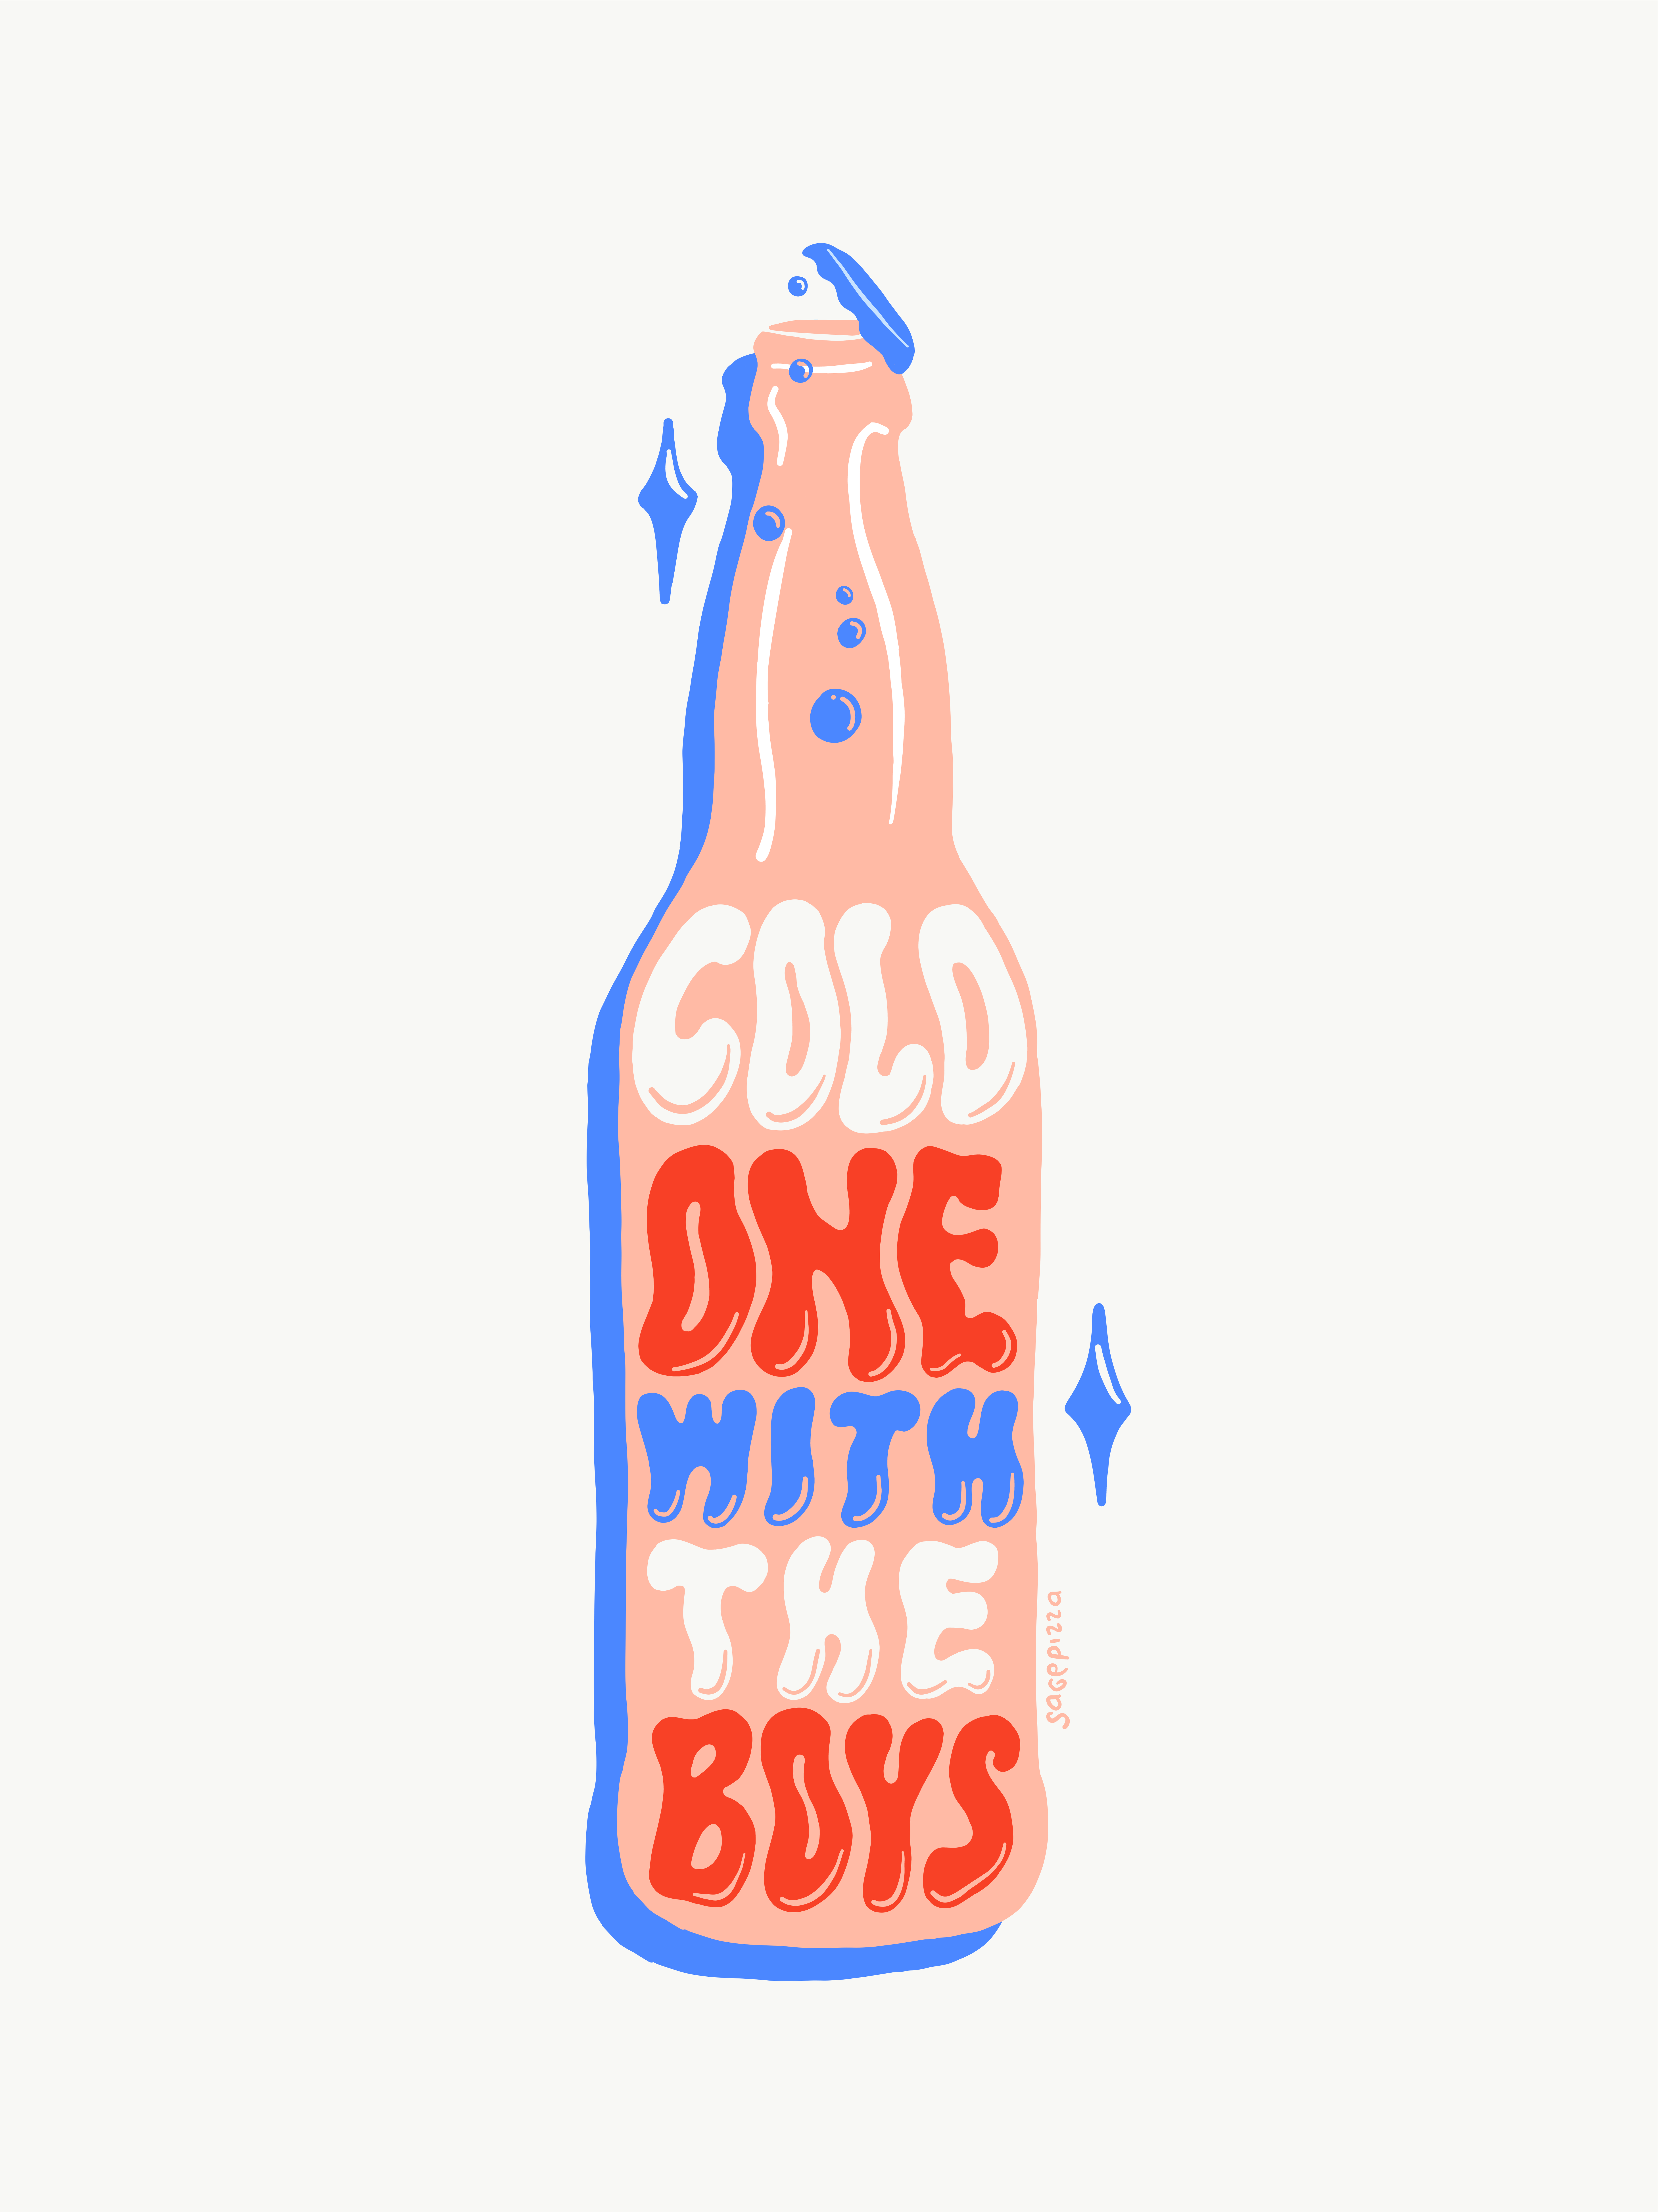 ColdOneWithTheBoys